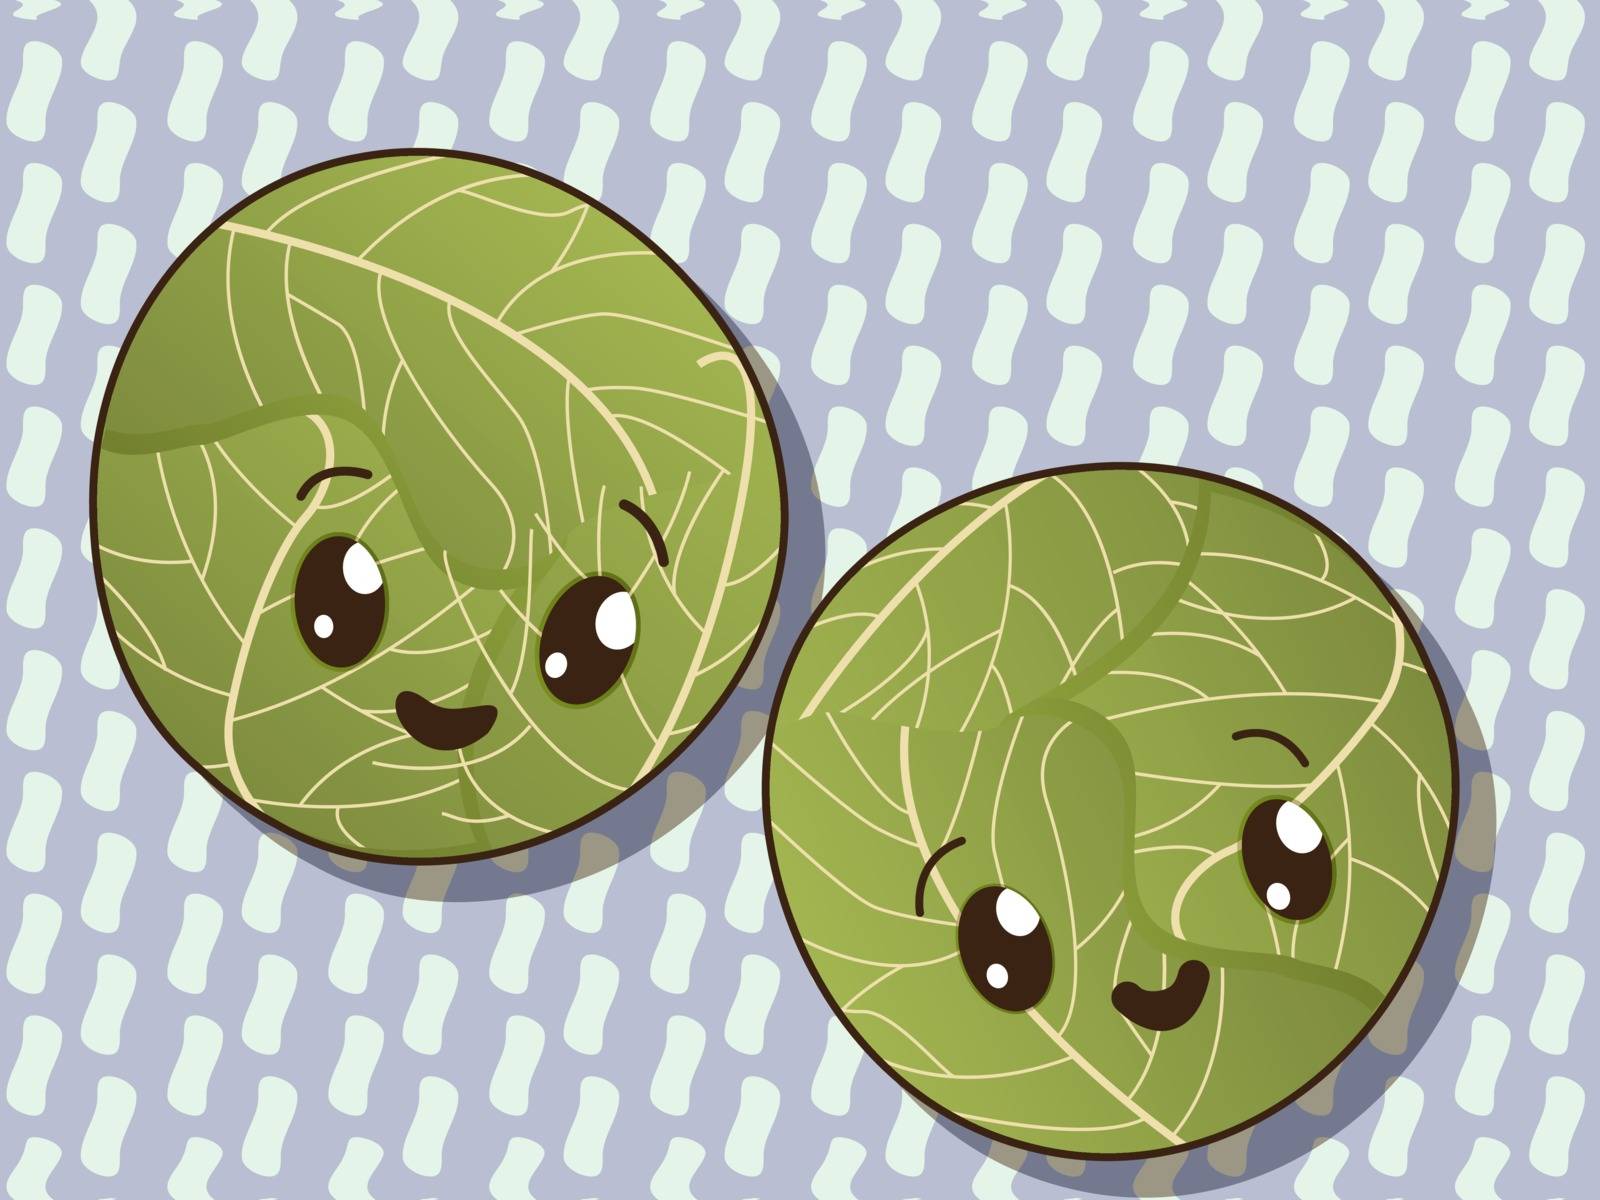 Kawaii cabbage icons by Lirch